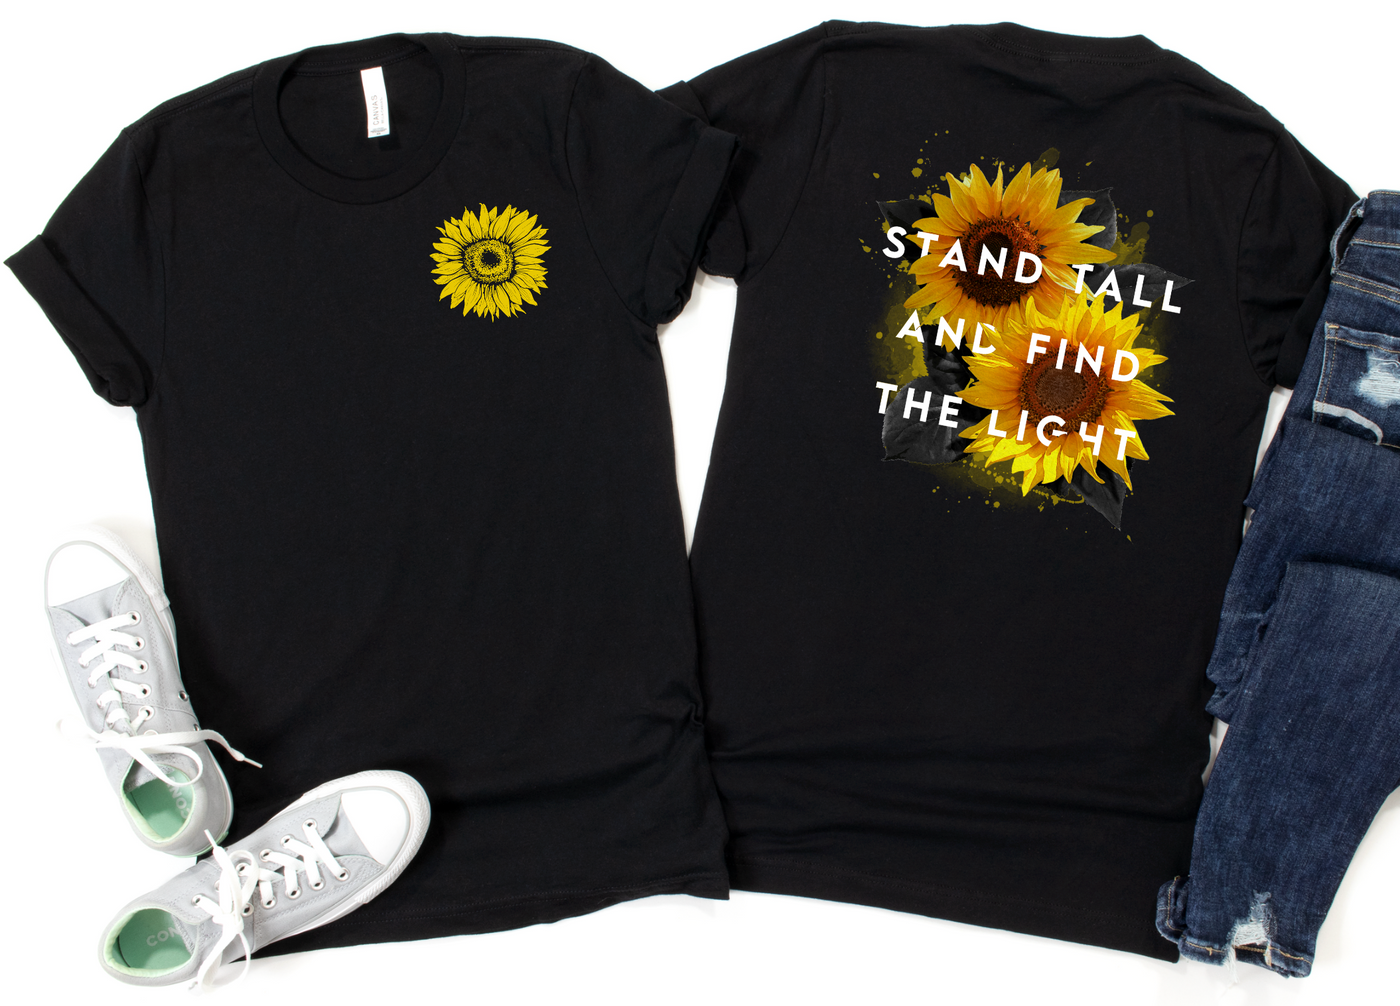 Stand Tall and Find the Light Tee